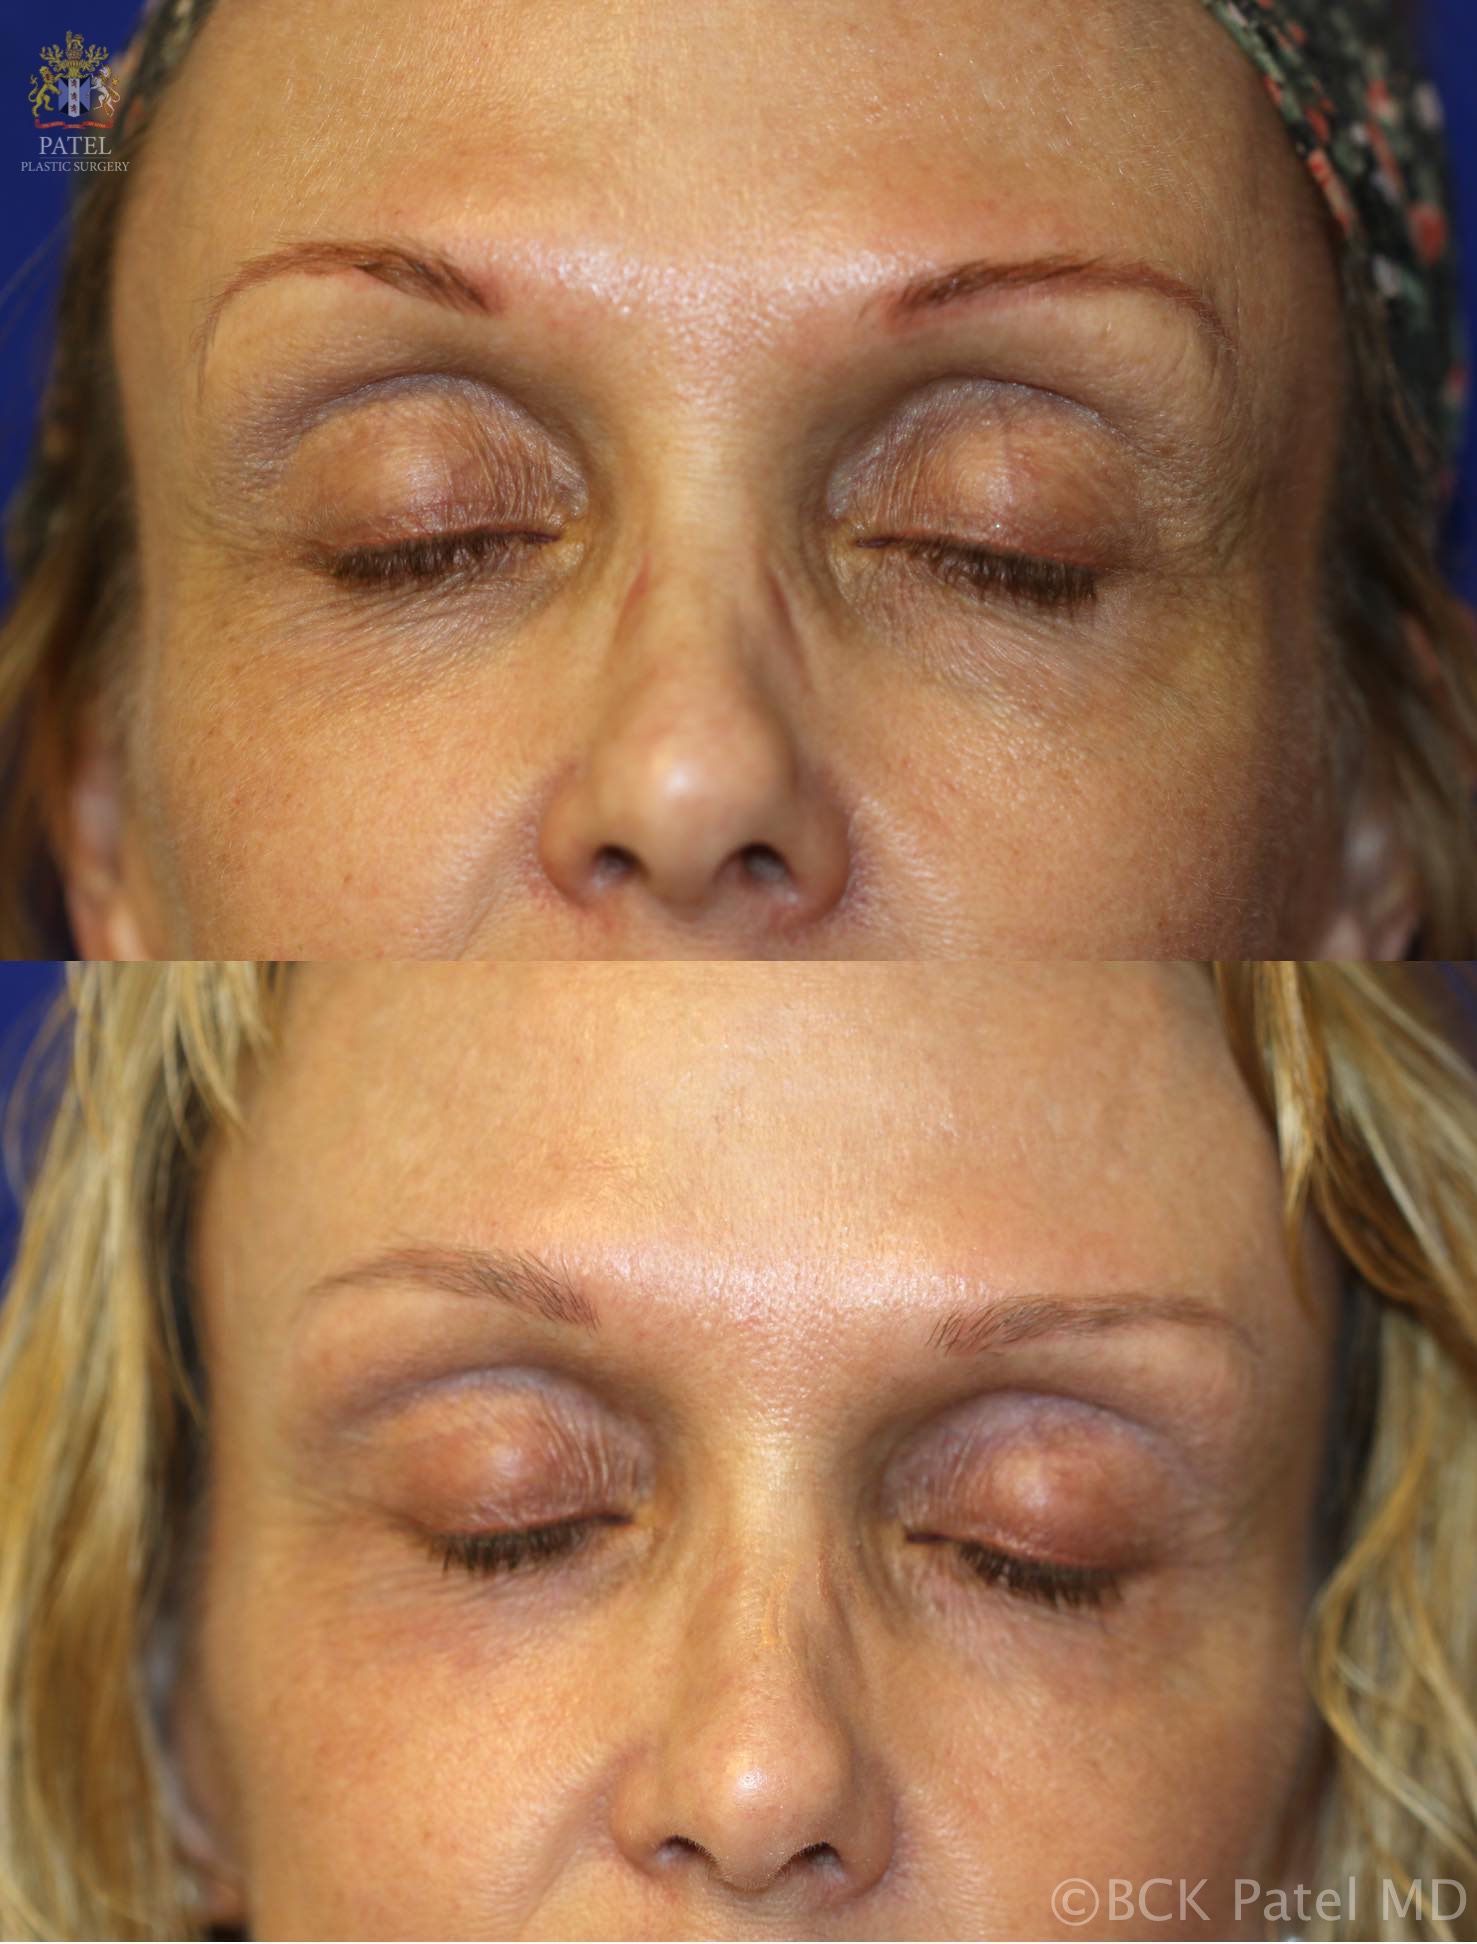 englishsurgeon.com. Photos show a nice improvement in the texture and wrinkles of the upper eyelids after use of the fractionated CO2 laser. BCK Patel MD, FRCS, Salt Lake City, St. George